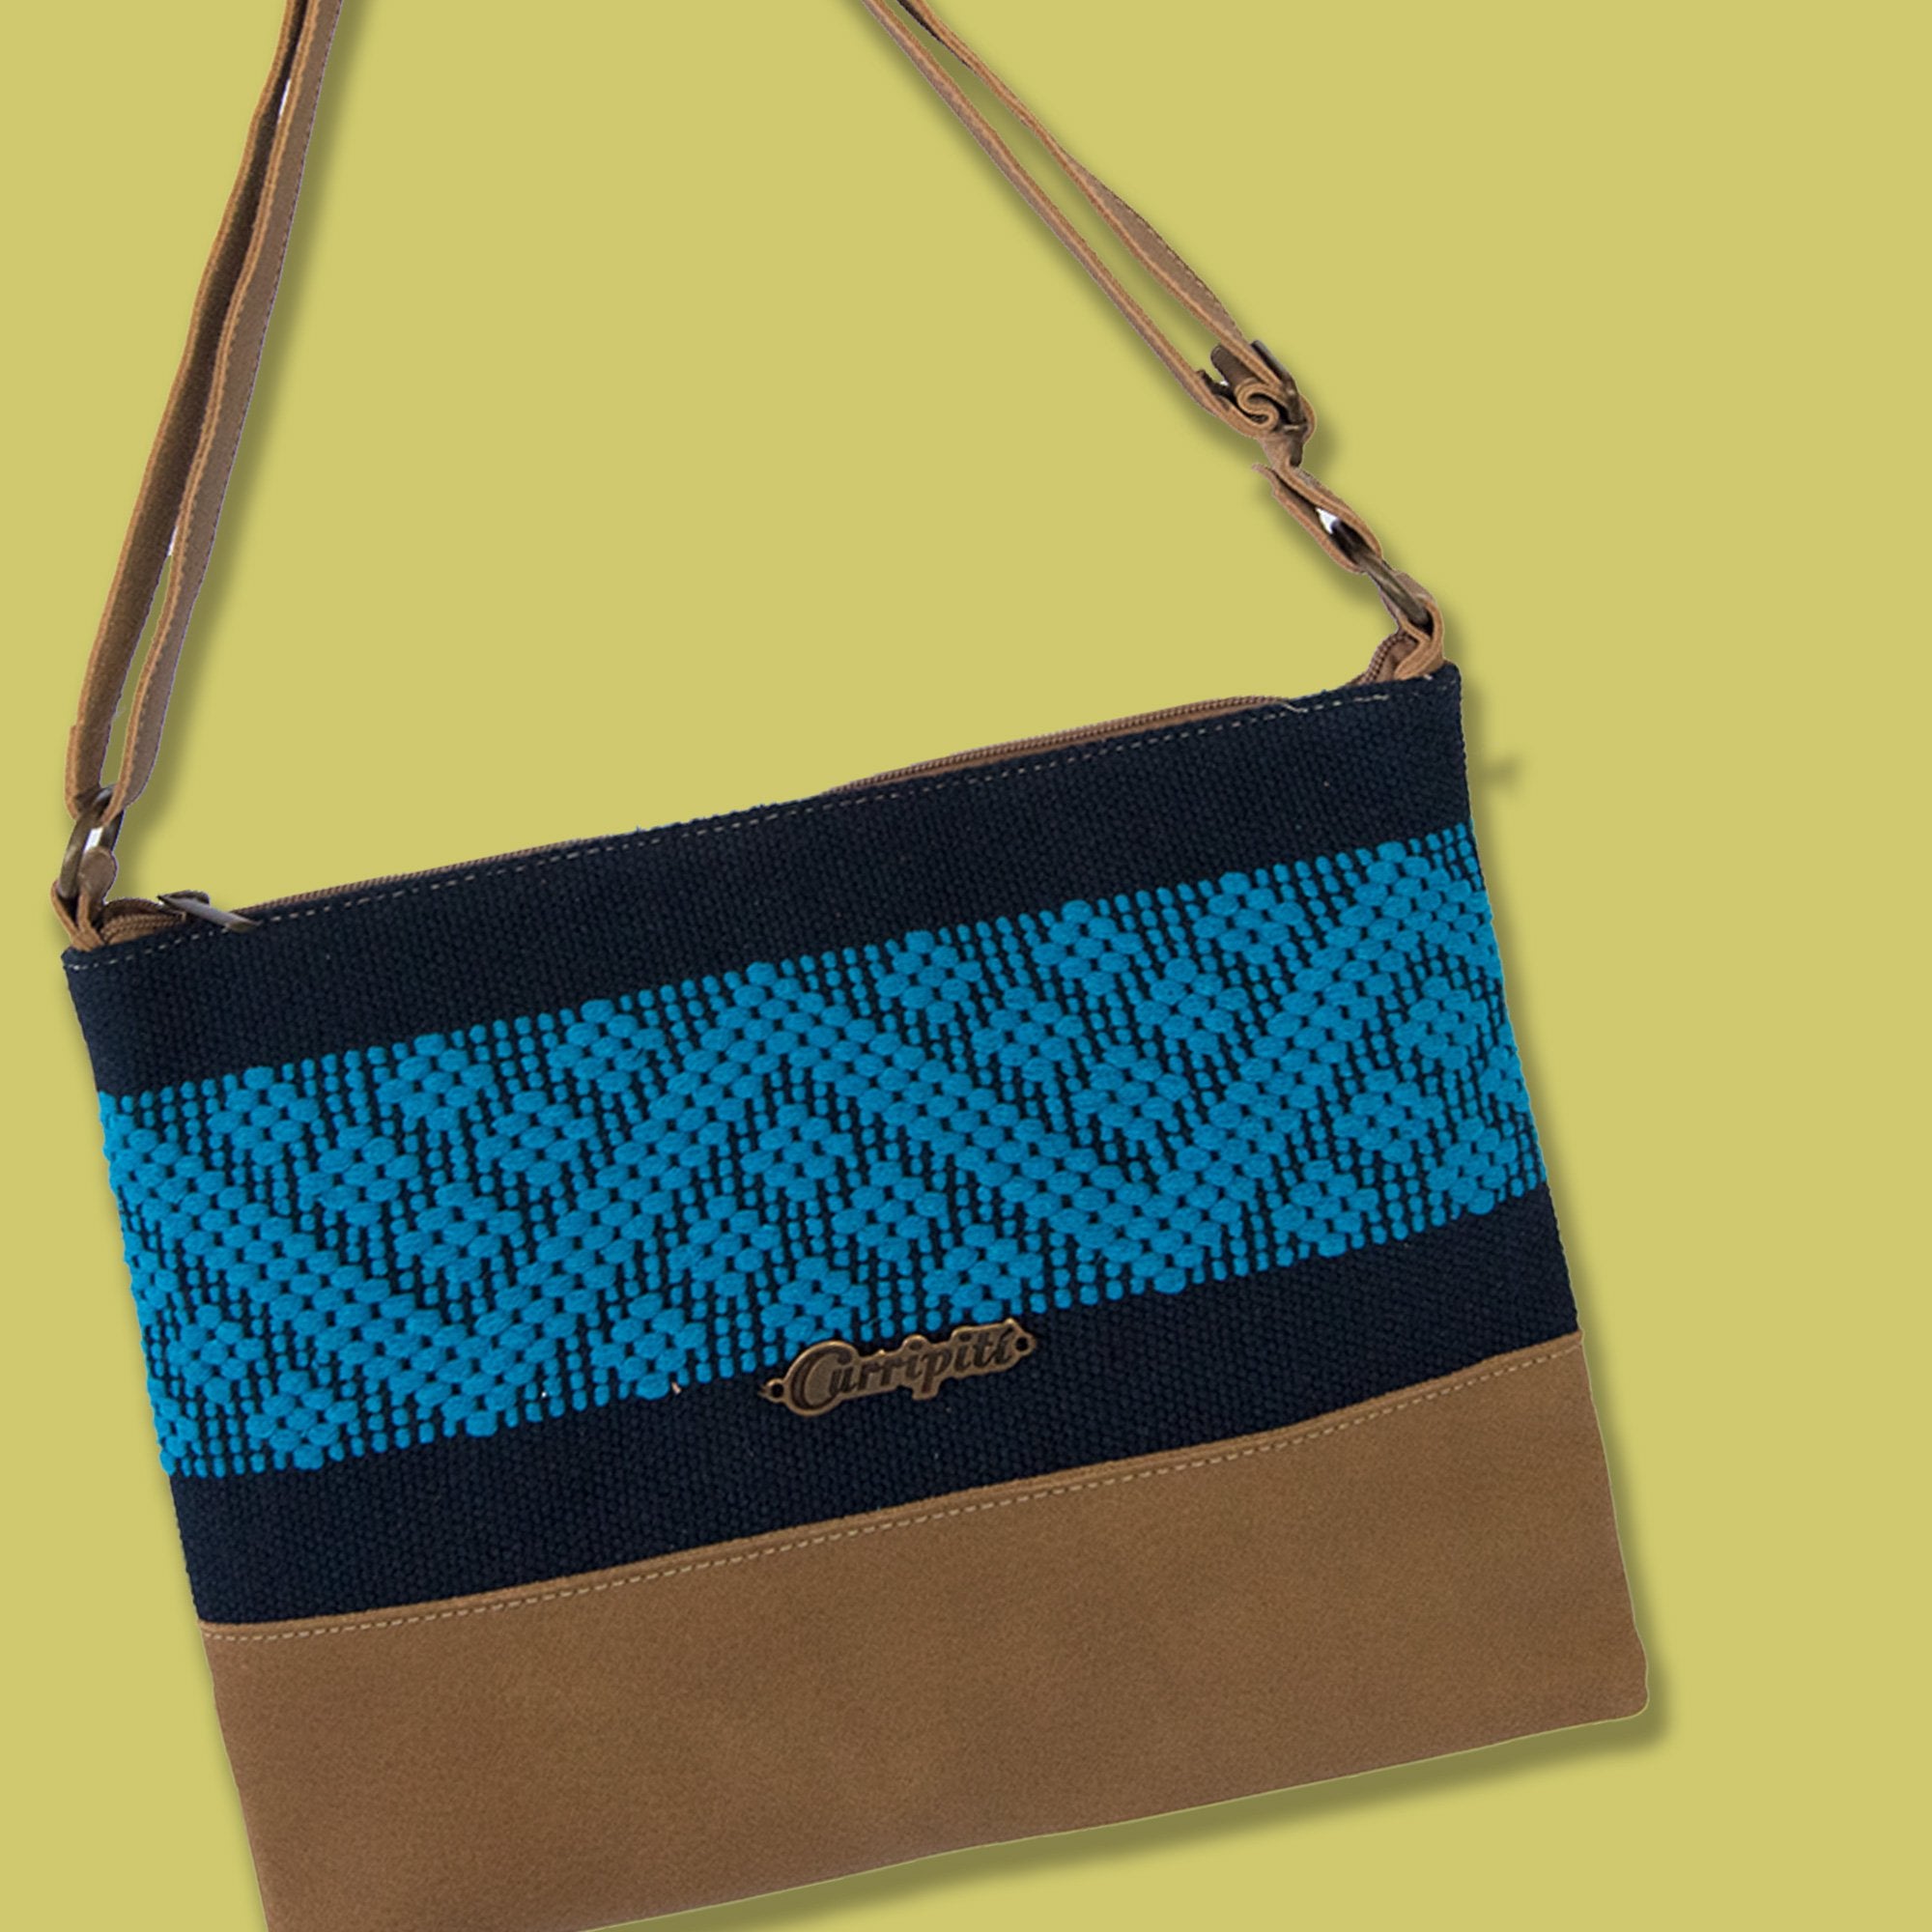 Cross-Body Bag in Camel Leather with Blue Stripe.